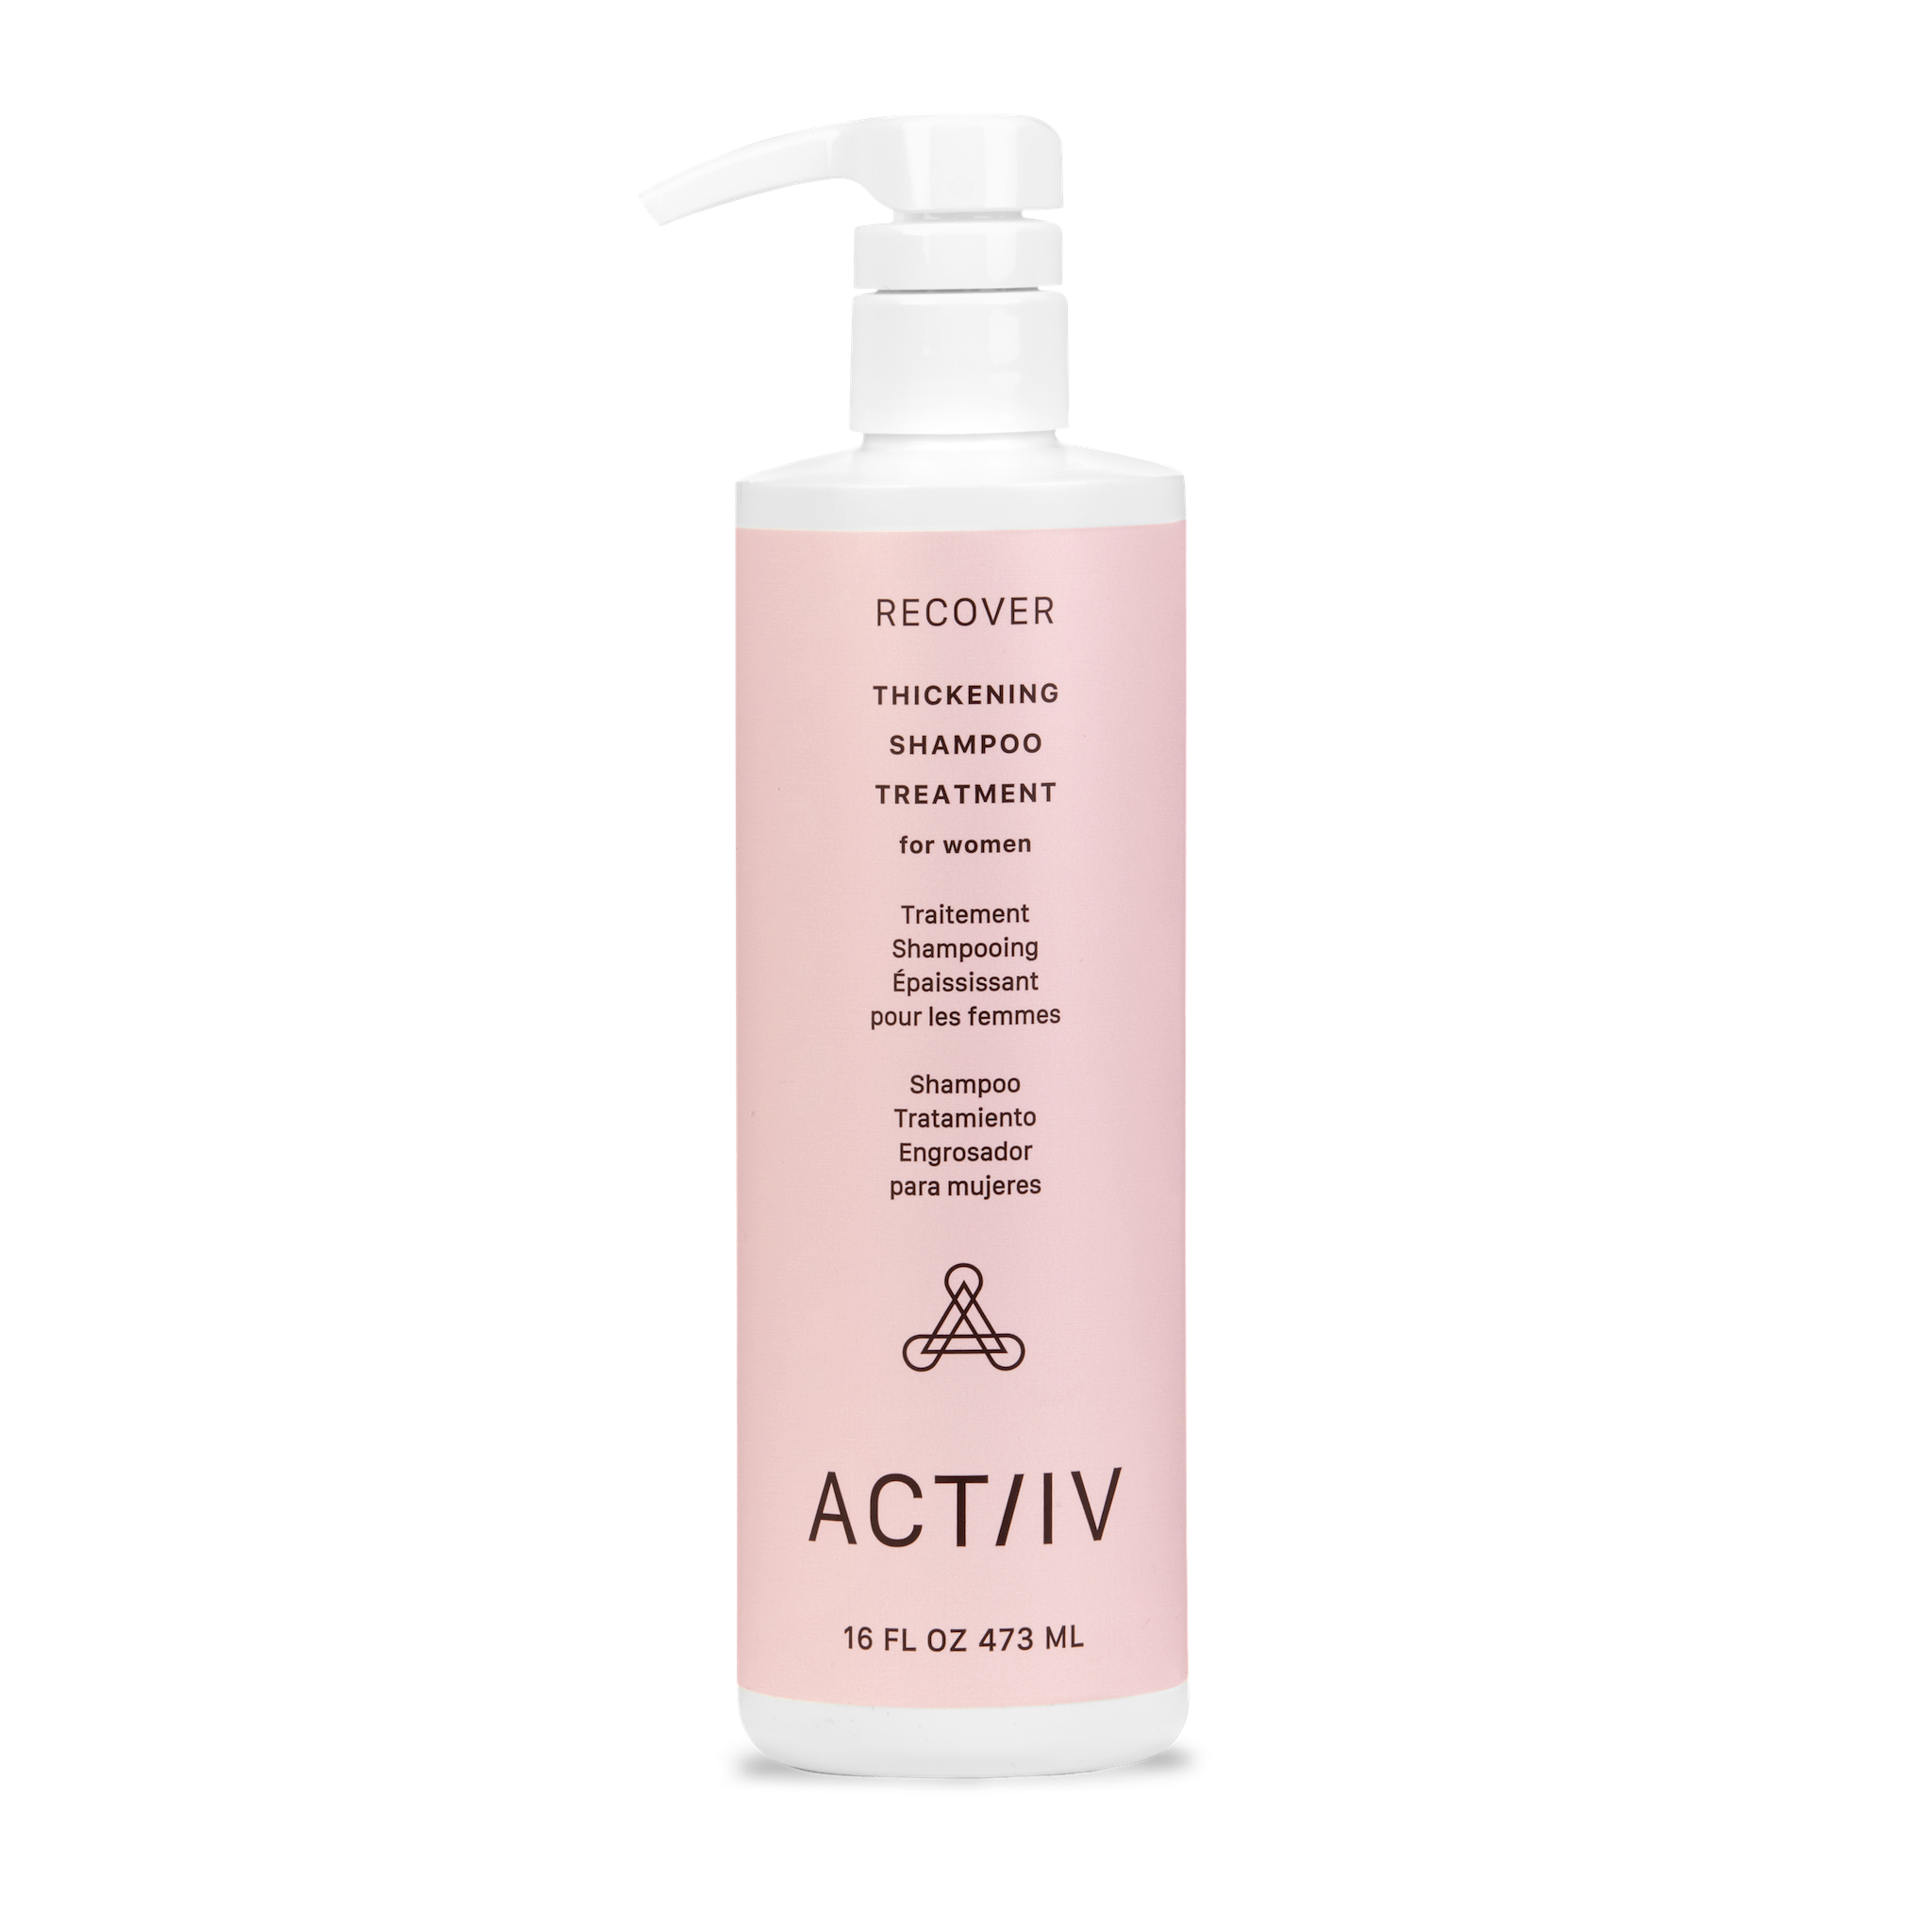 Actiiv Recover Thickening Shampoo Treatment for Women 16oz Bottle